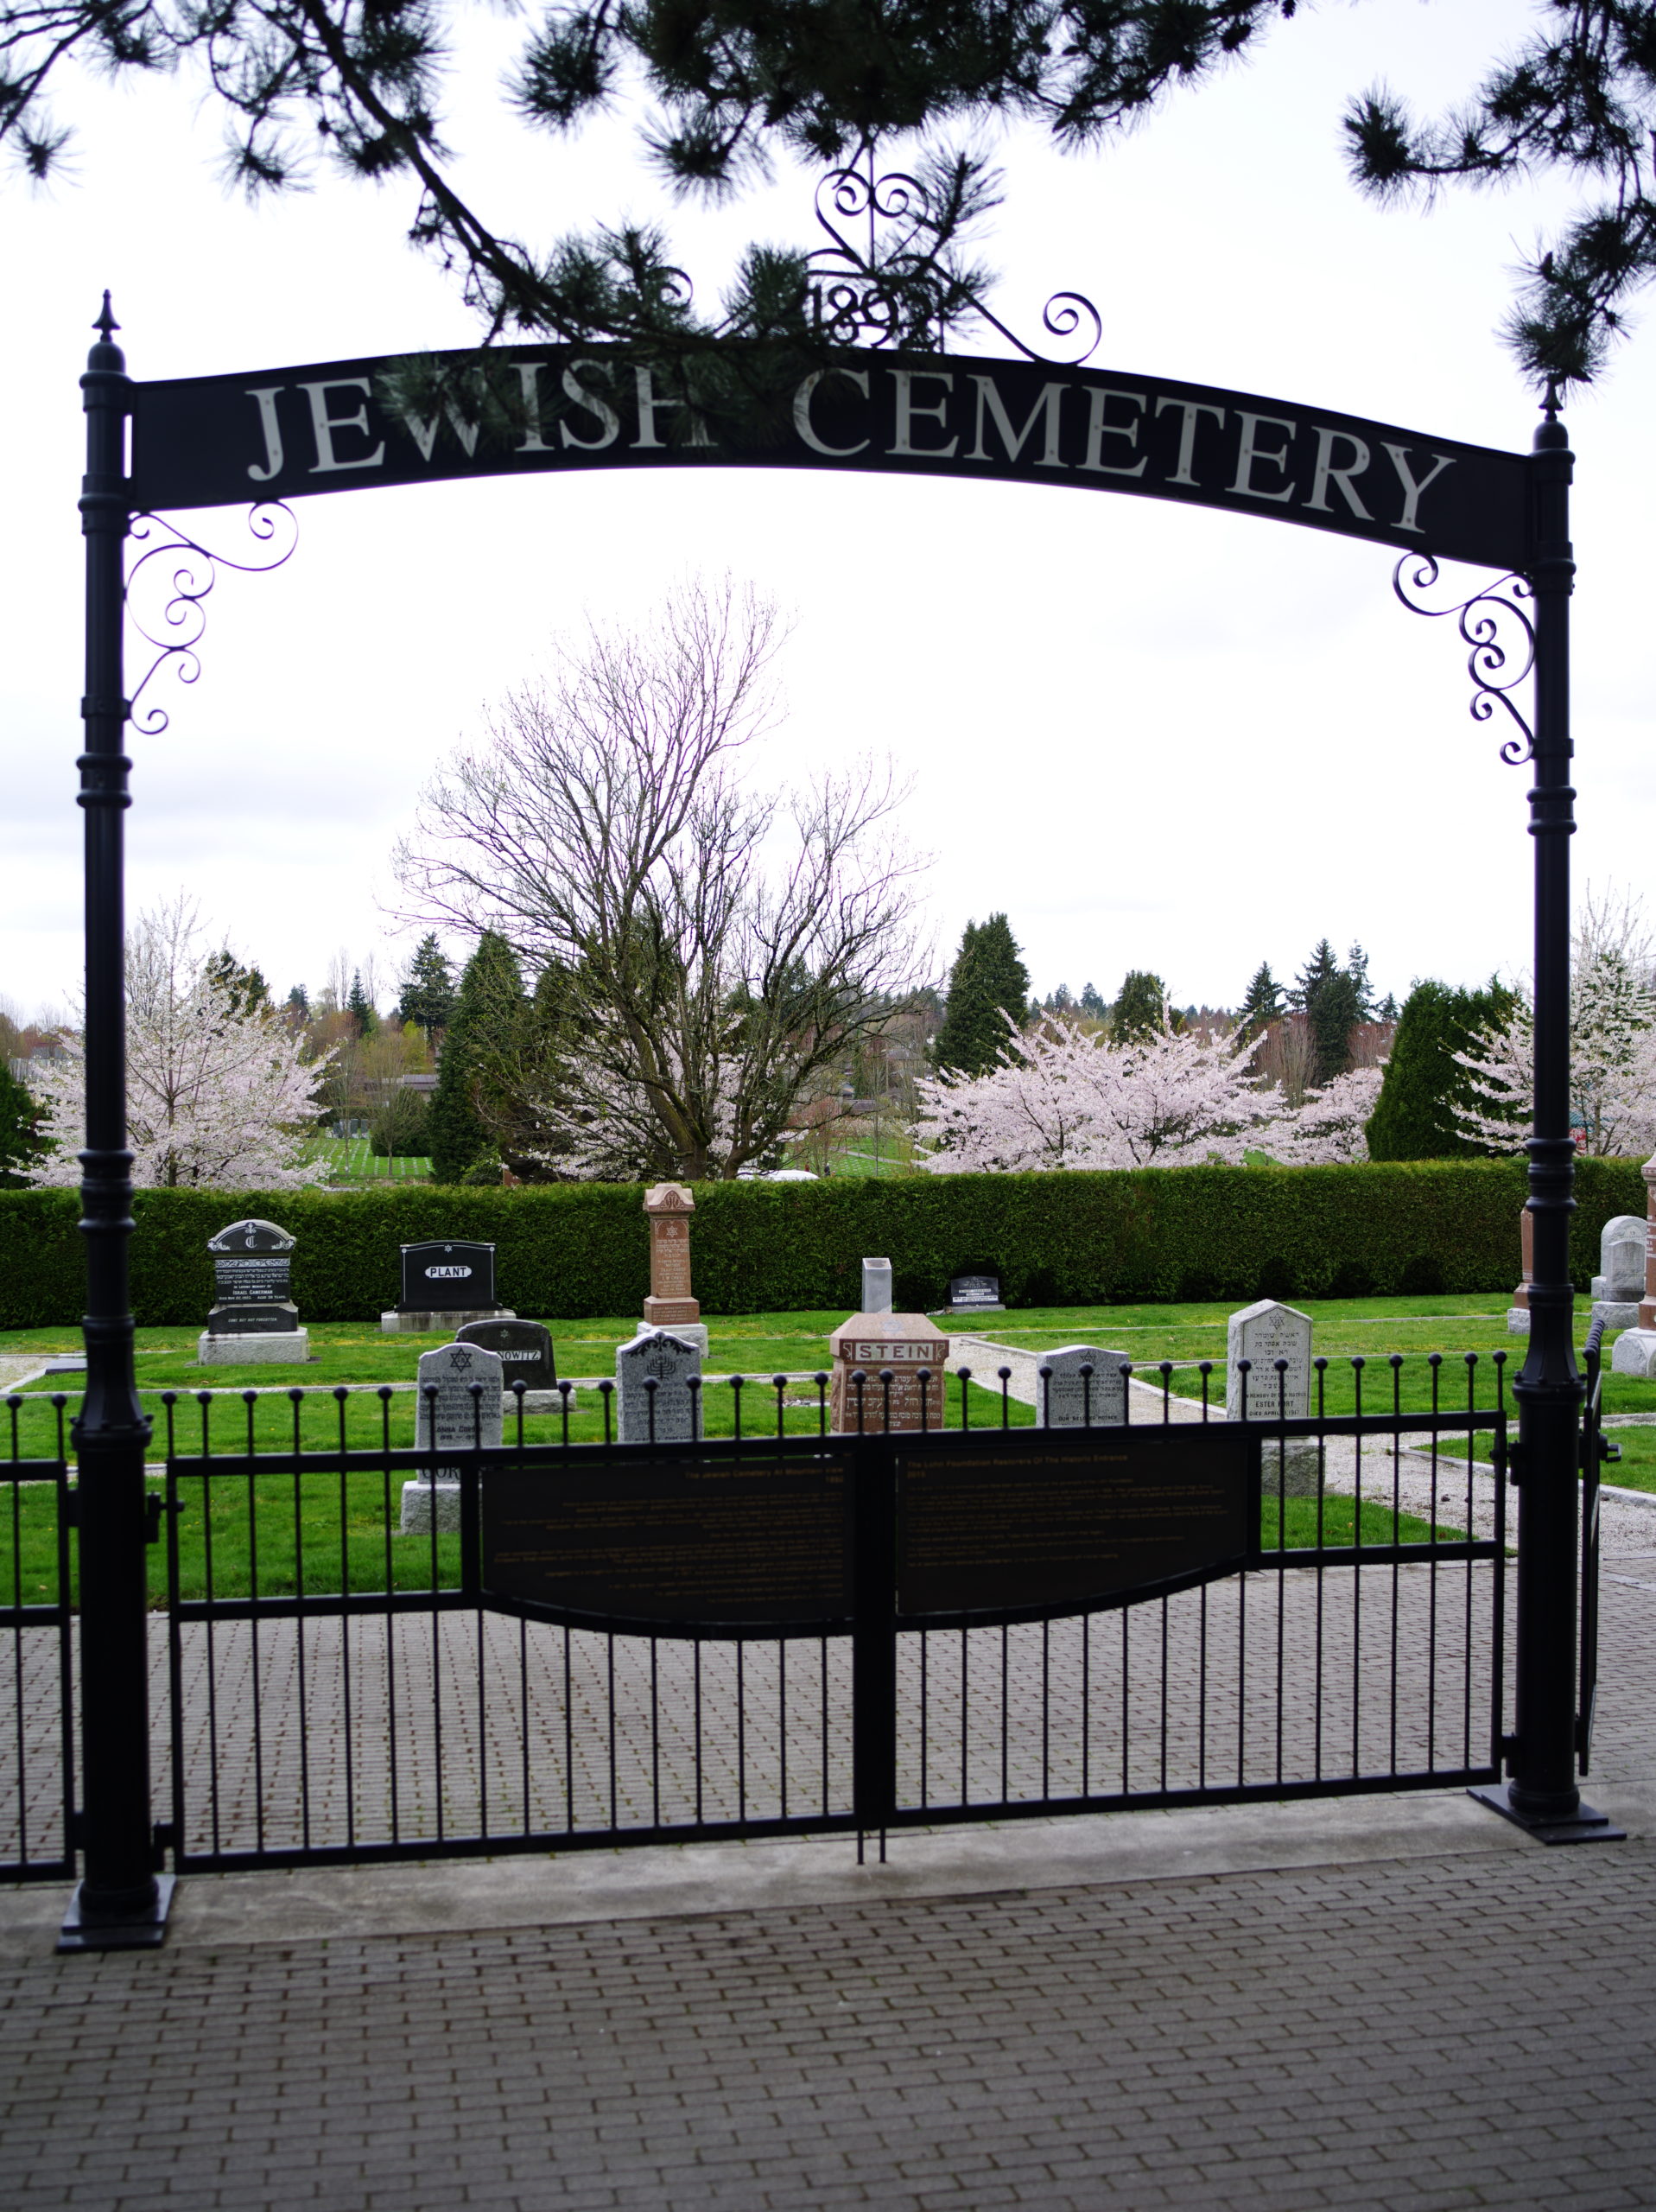 Image Description: The closed entrance gates to Mountain View’s Jewish Cemetery in the foreground of the photo. The top of the gates have the numbers 1892 framed by thin, curving decorative metal, noting the year the Jewish Cemetery was created.Headstones are visible through the iron bars of the gate. Cherry tree blossoms are visible above the hedgeline at the back of the photograph.